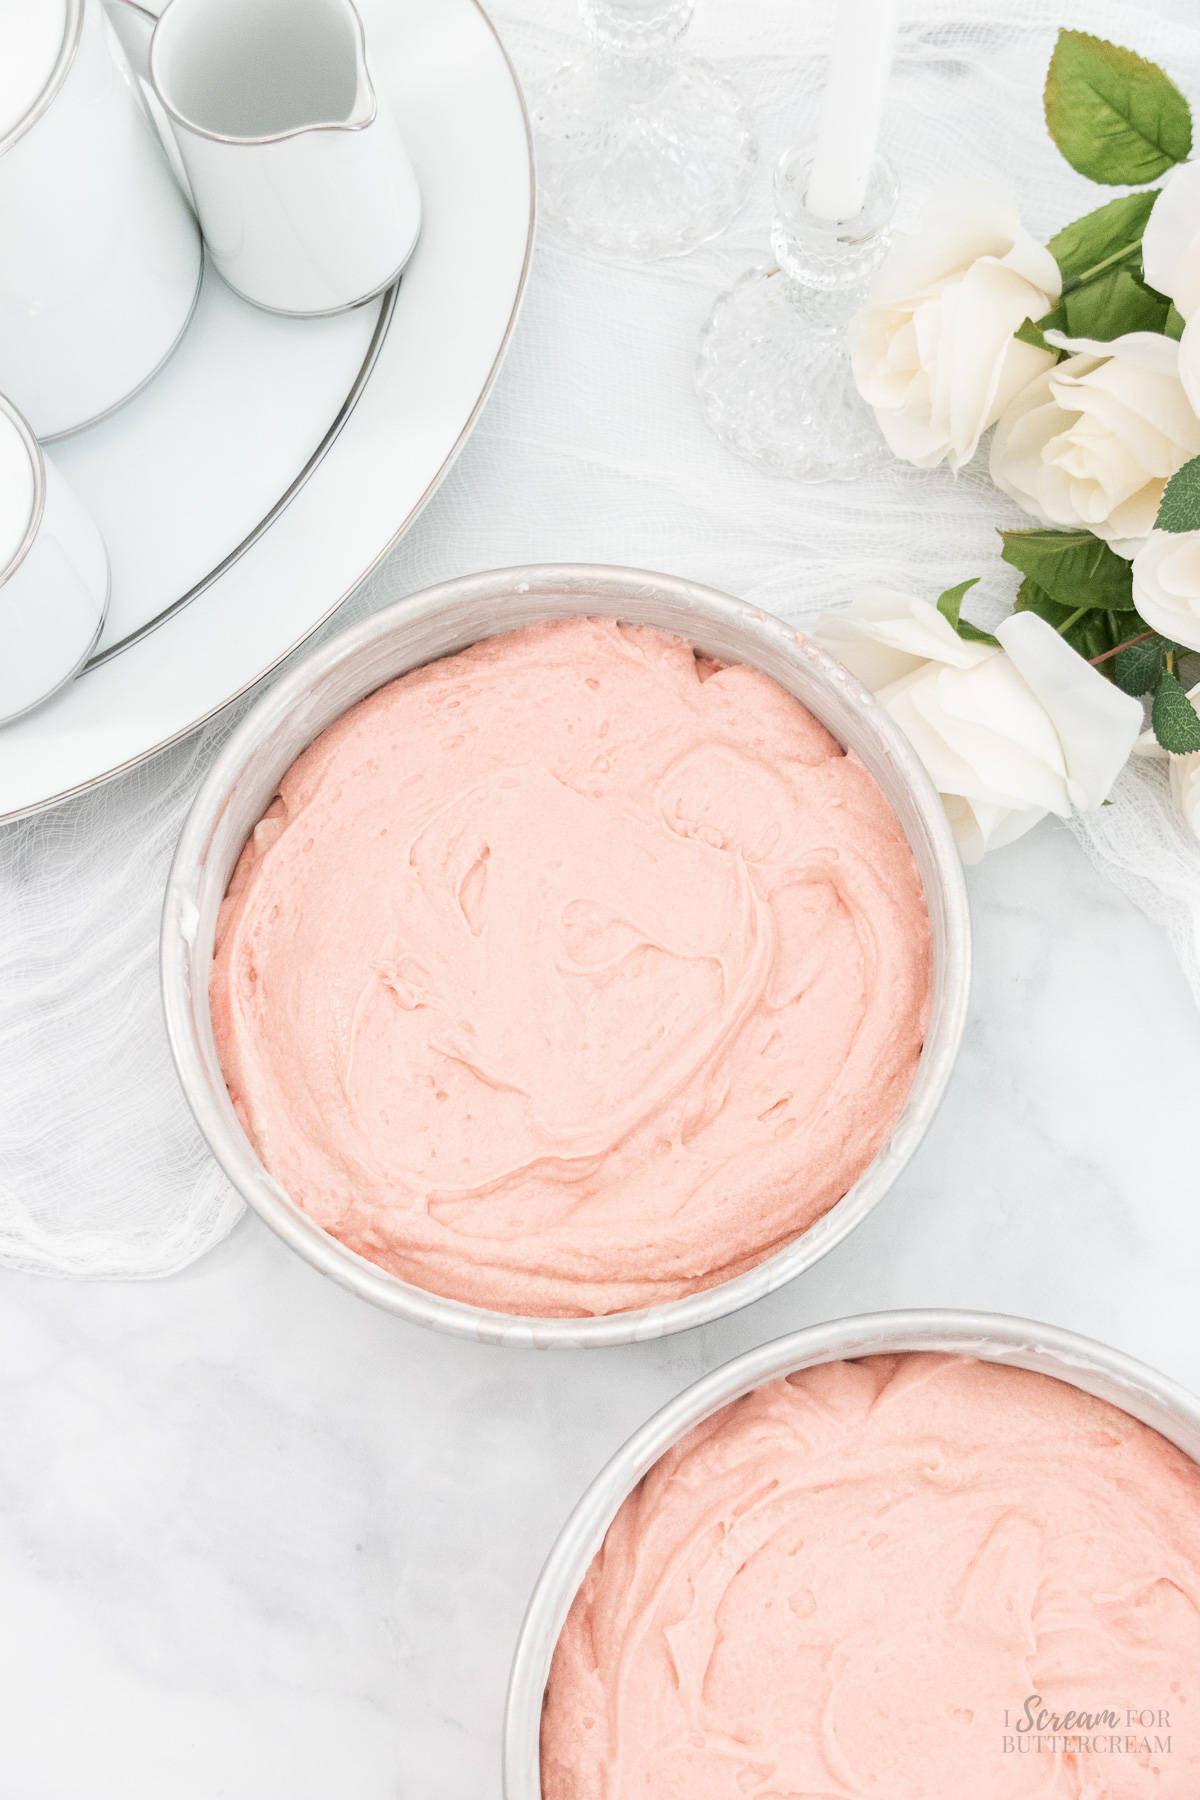 Strawberry cake batter in two round cake pans.